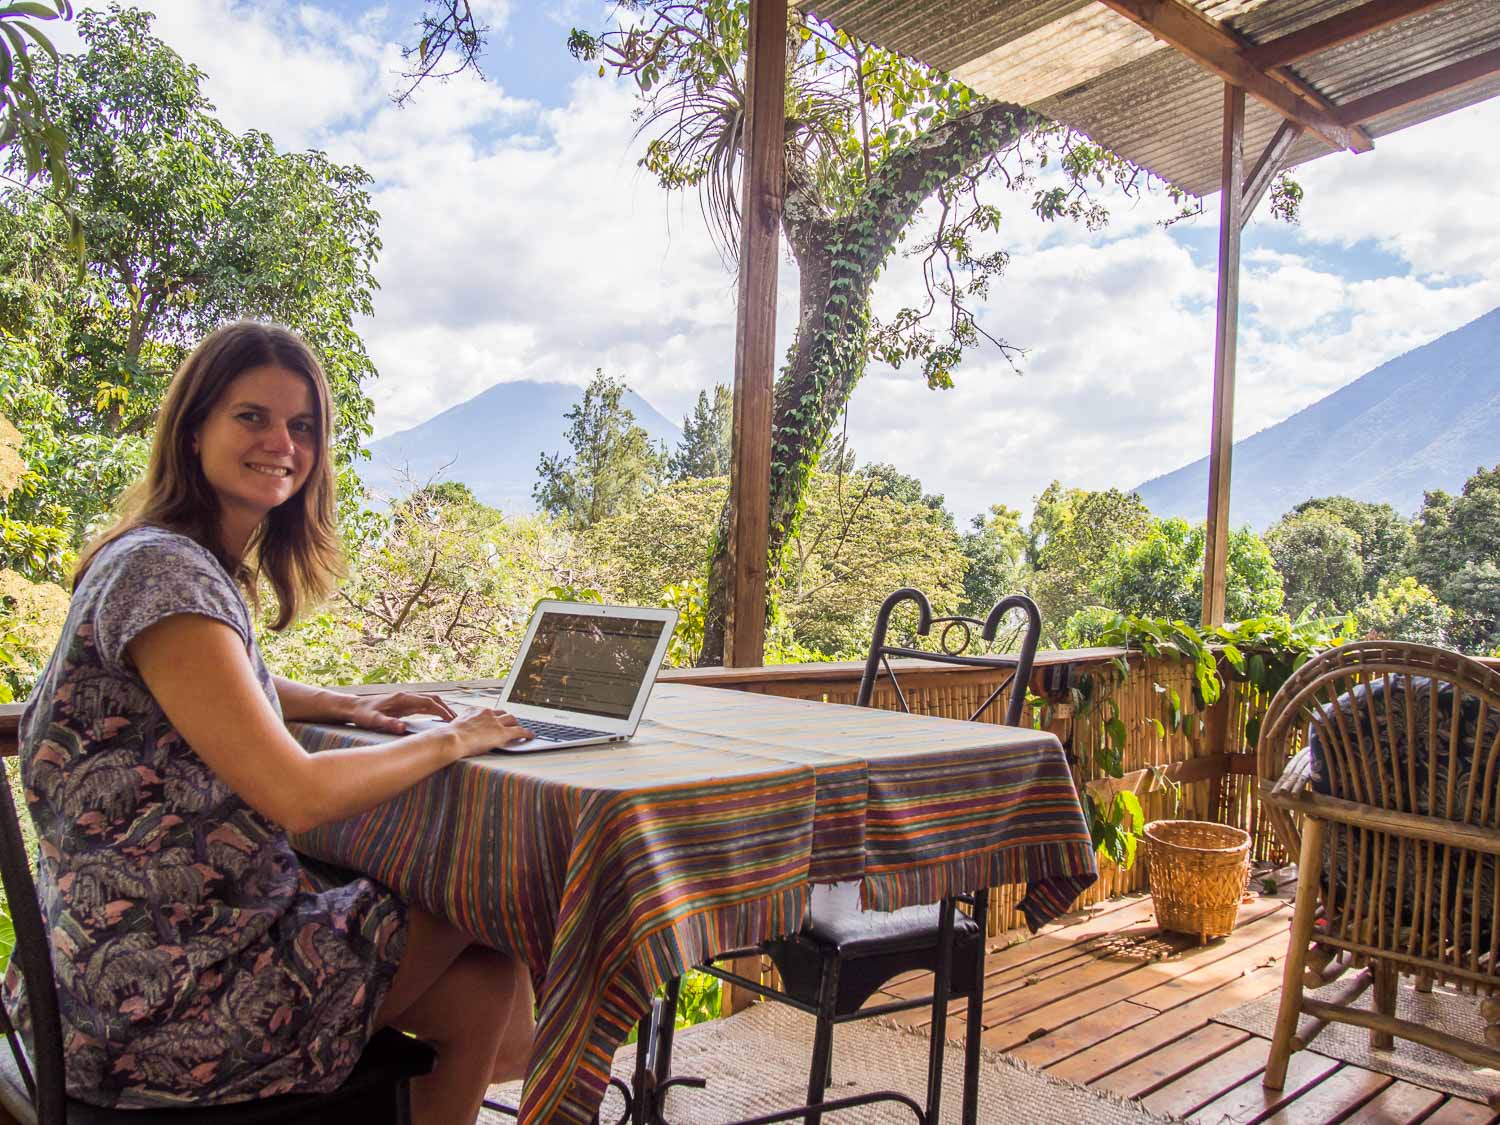 6 Perks Of Being A Digital Nomad You Probably Don’t Know!